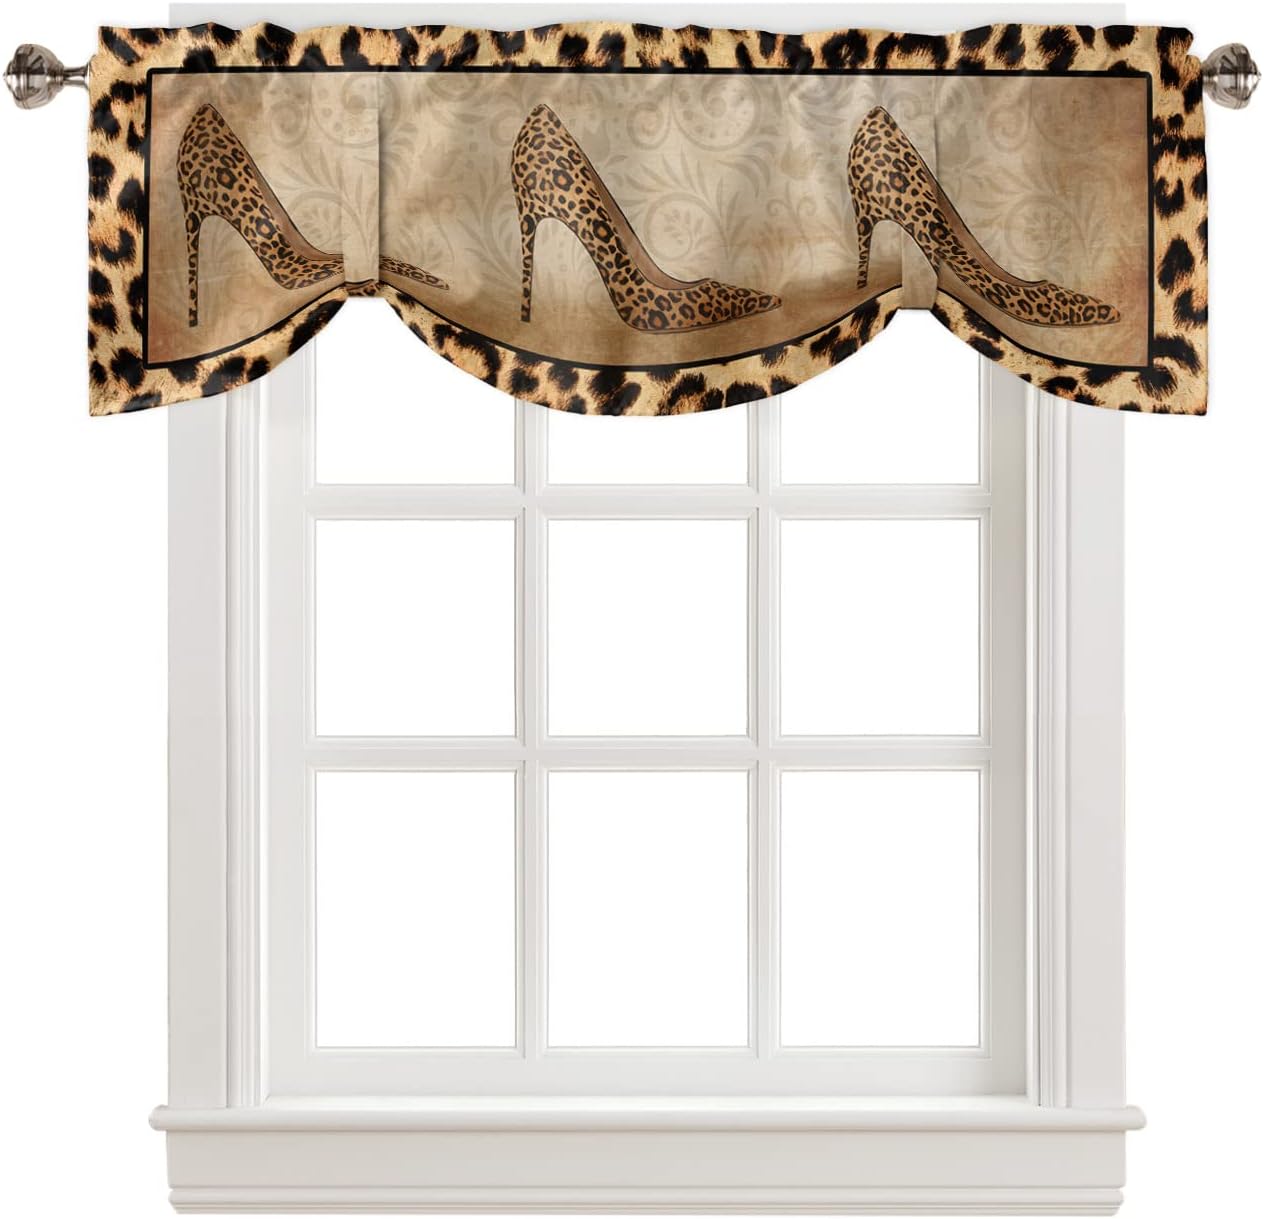 Tie Up Curtain Valance Window Topper 1 Panel [...]